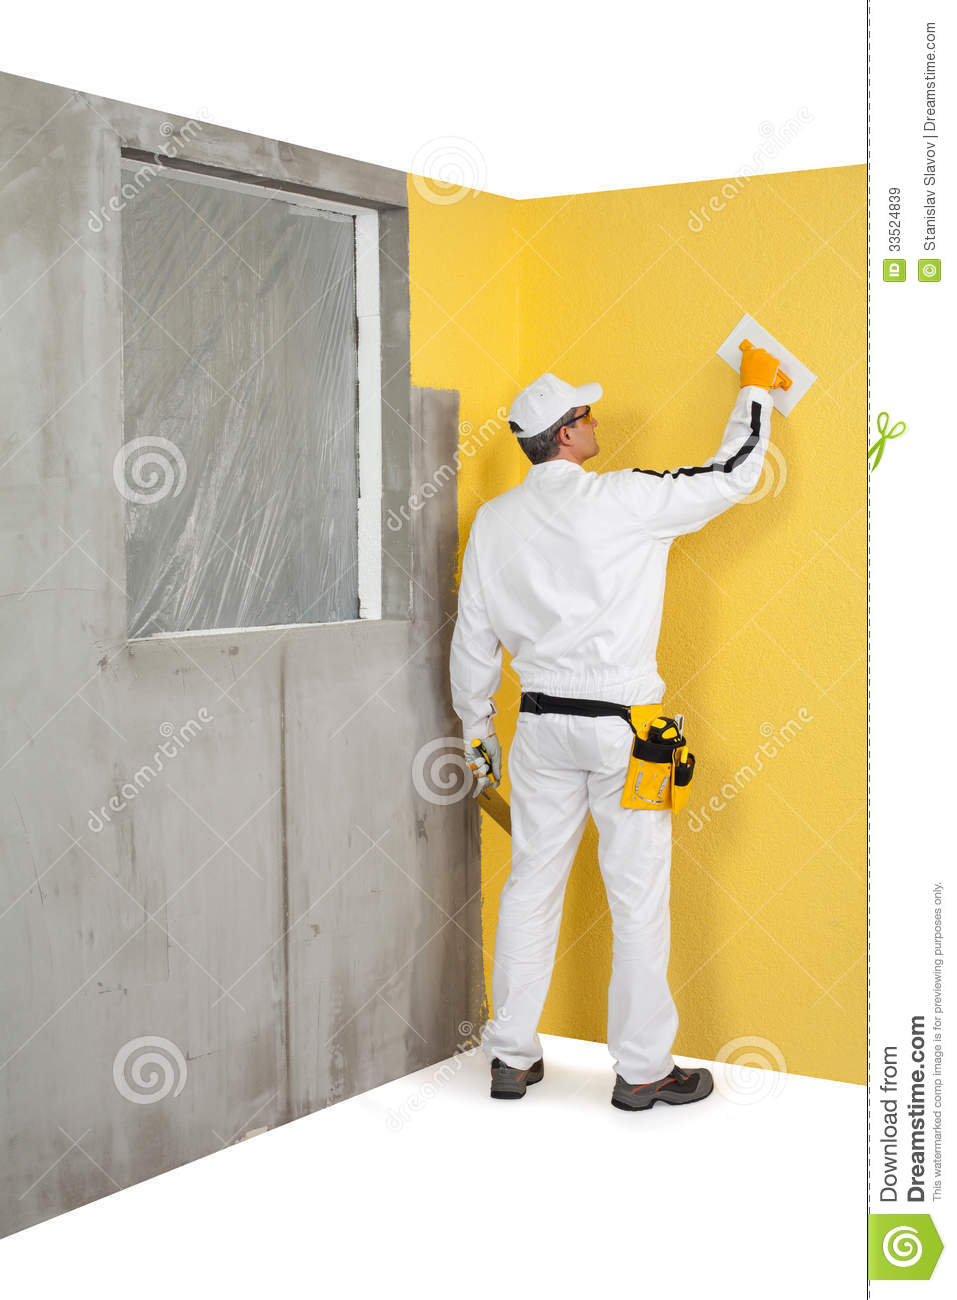 Worker Spreading A Plaster On A Wall Royalty Free Stock Images   Image    